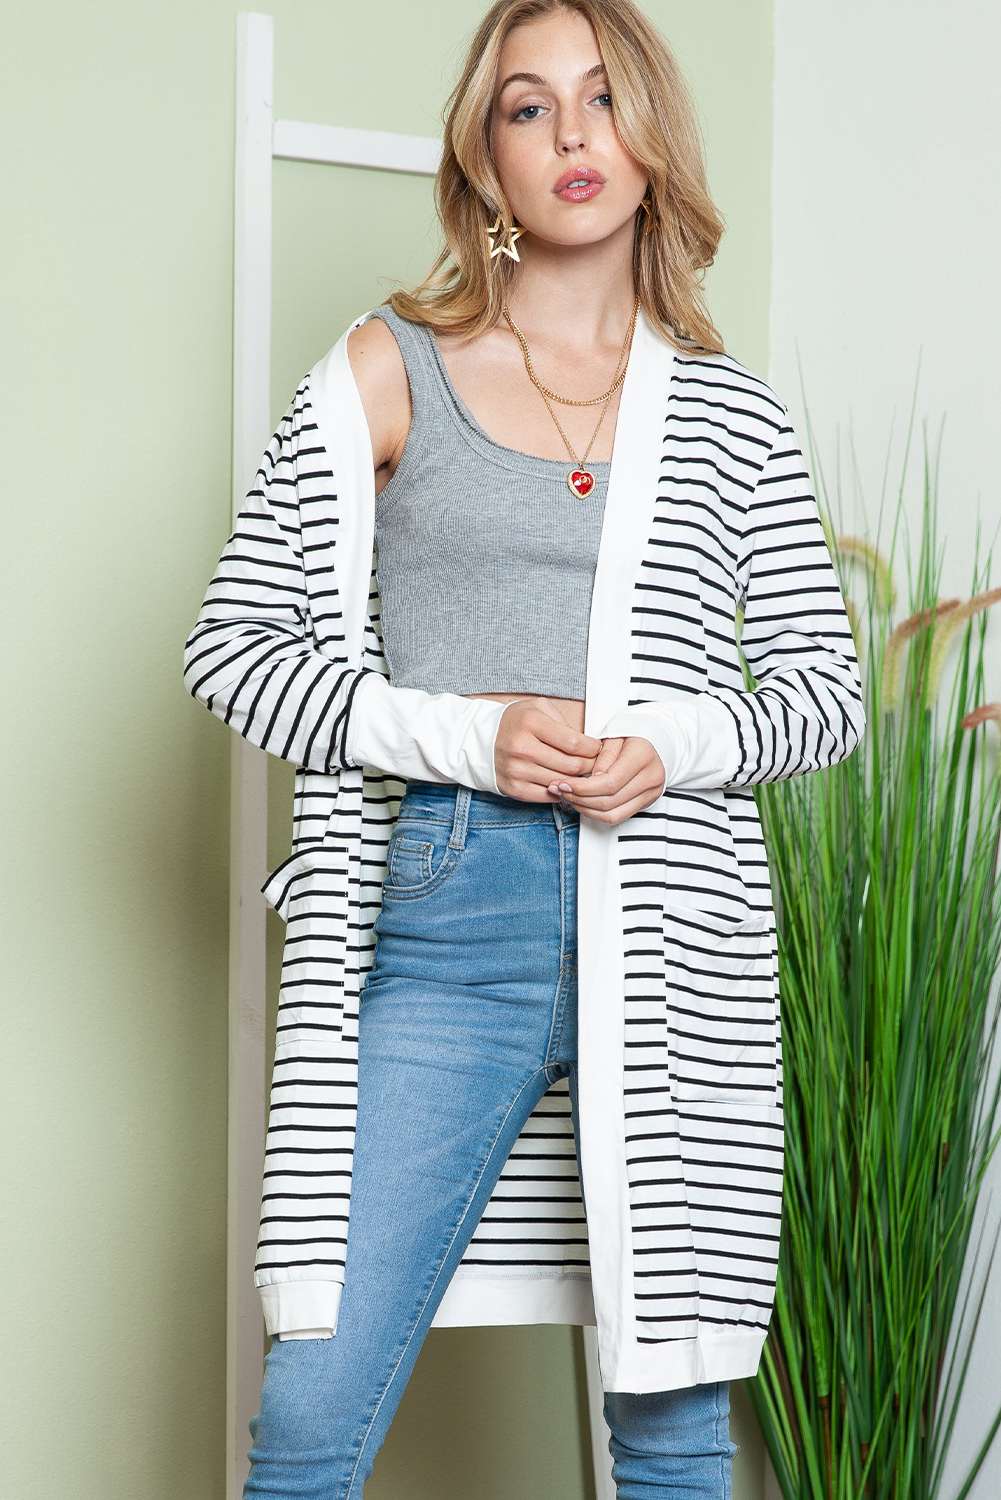 White Striped Side Pockets Open Front Long Cardigan